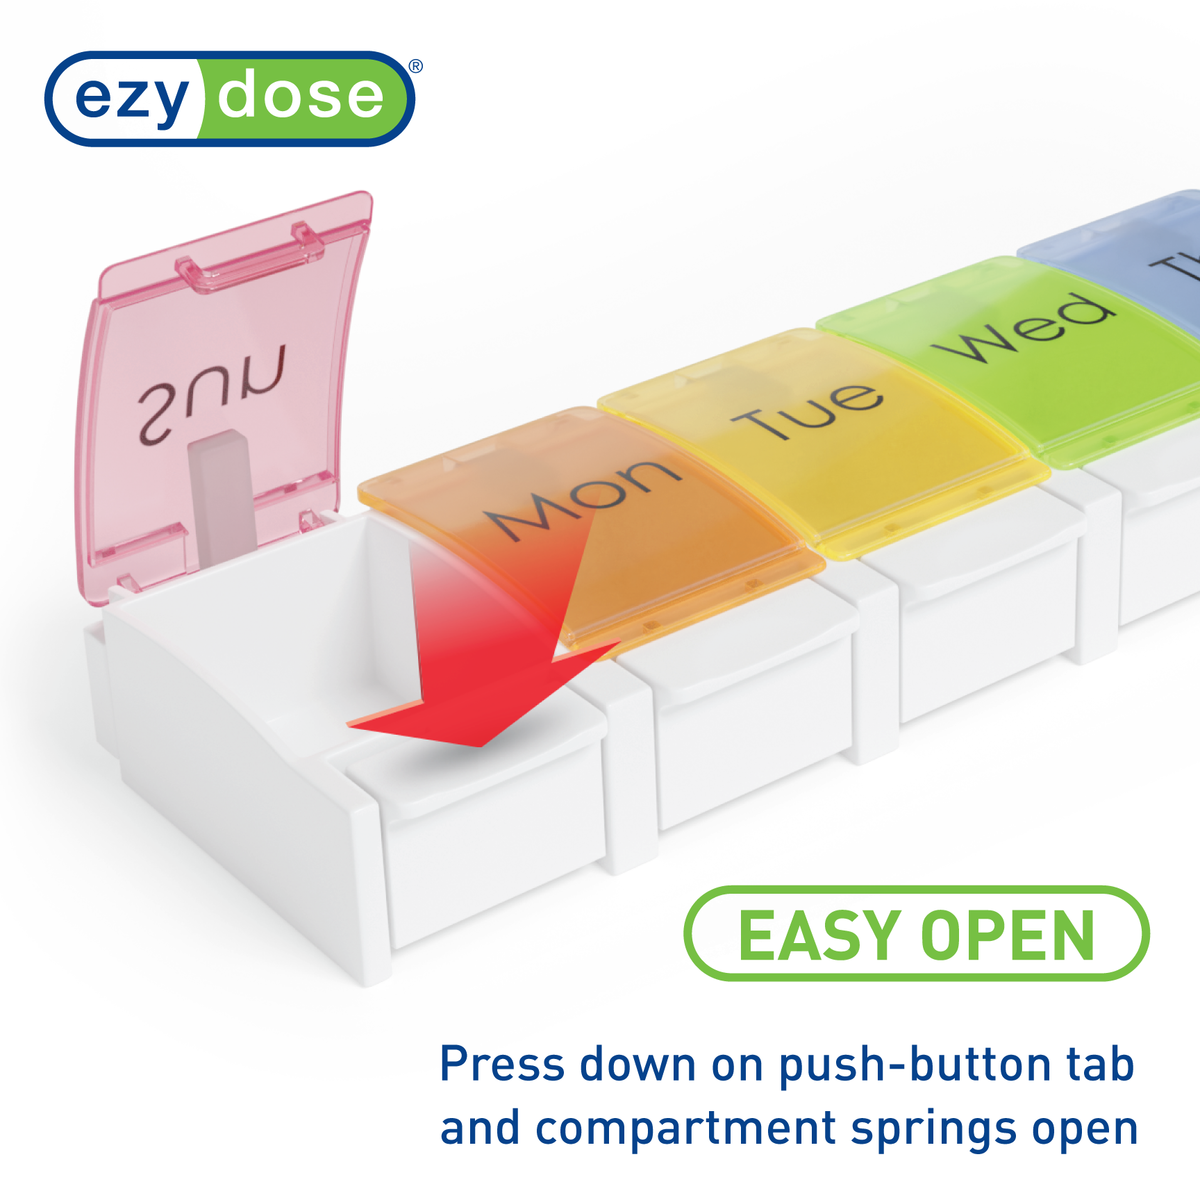 Weekly rainbow pill organizer features easy open push-button tabs that spring open when pressed down